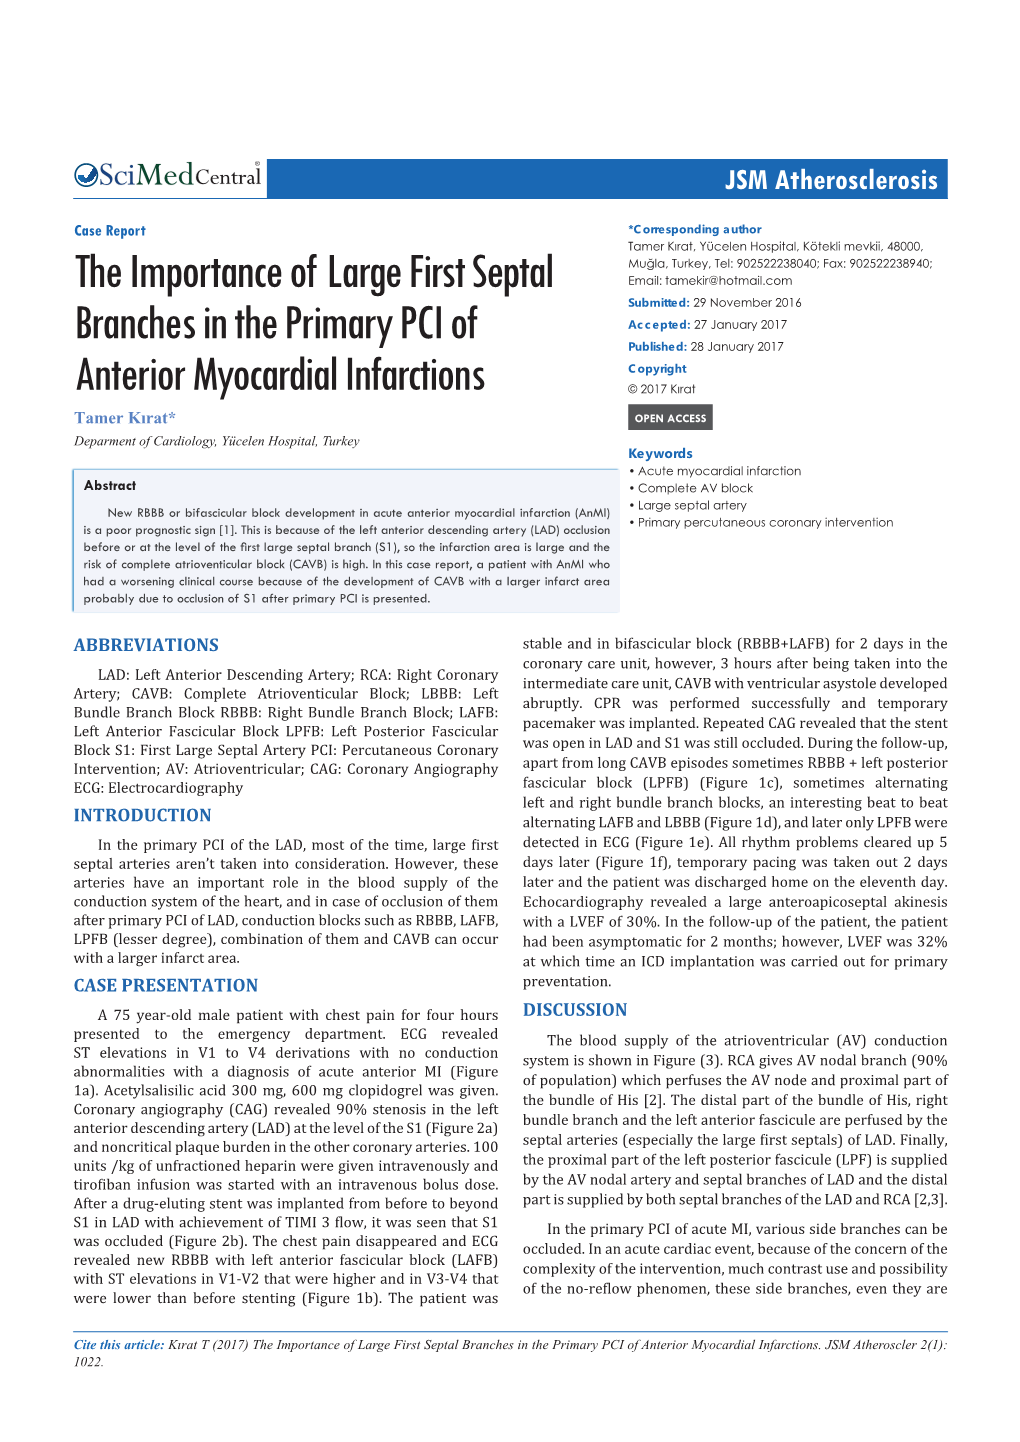 The Importance of Large First Septal Branches in the Primary PCI of Anterior Myocardial Infarctions